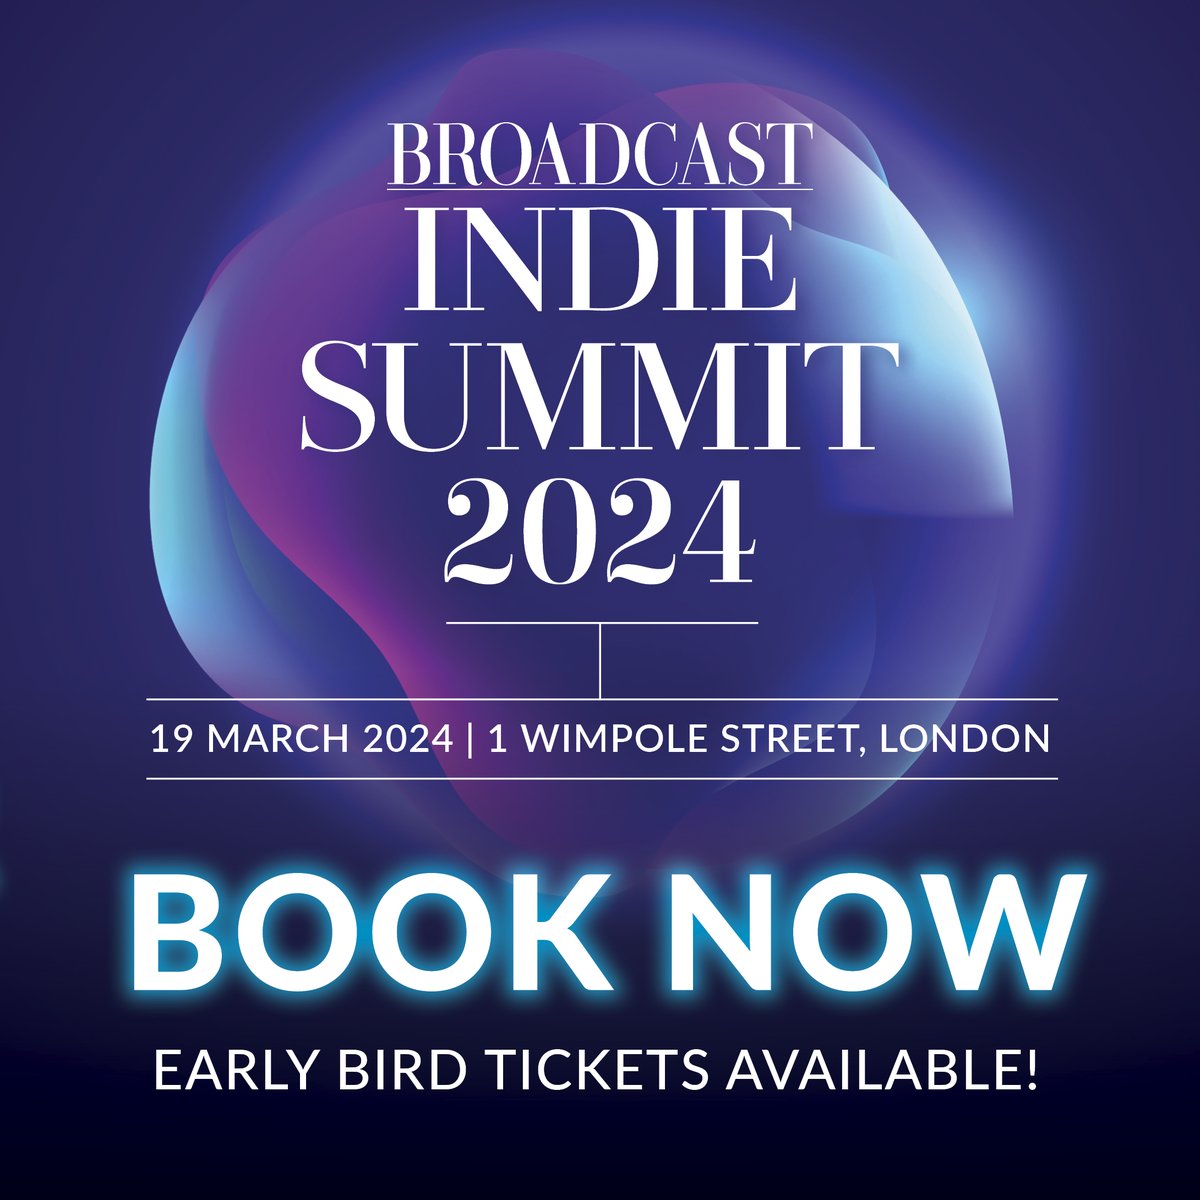 📢 The Broadcast #IndieSummit24 is back & early bird tickets are now available to book AND we've reduced ticket prices! The full programme will be announced soon, in the meantime check out all session outlines & book your spot! bit.ly/IndieSummit24